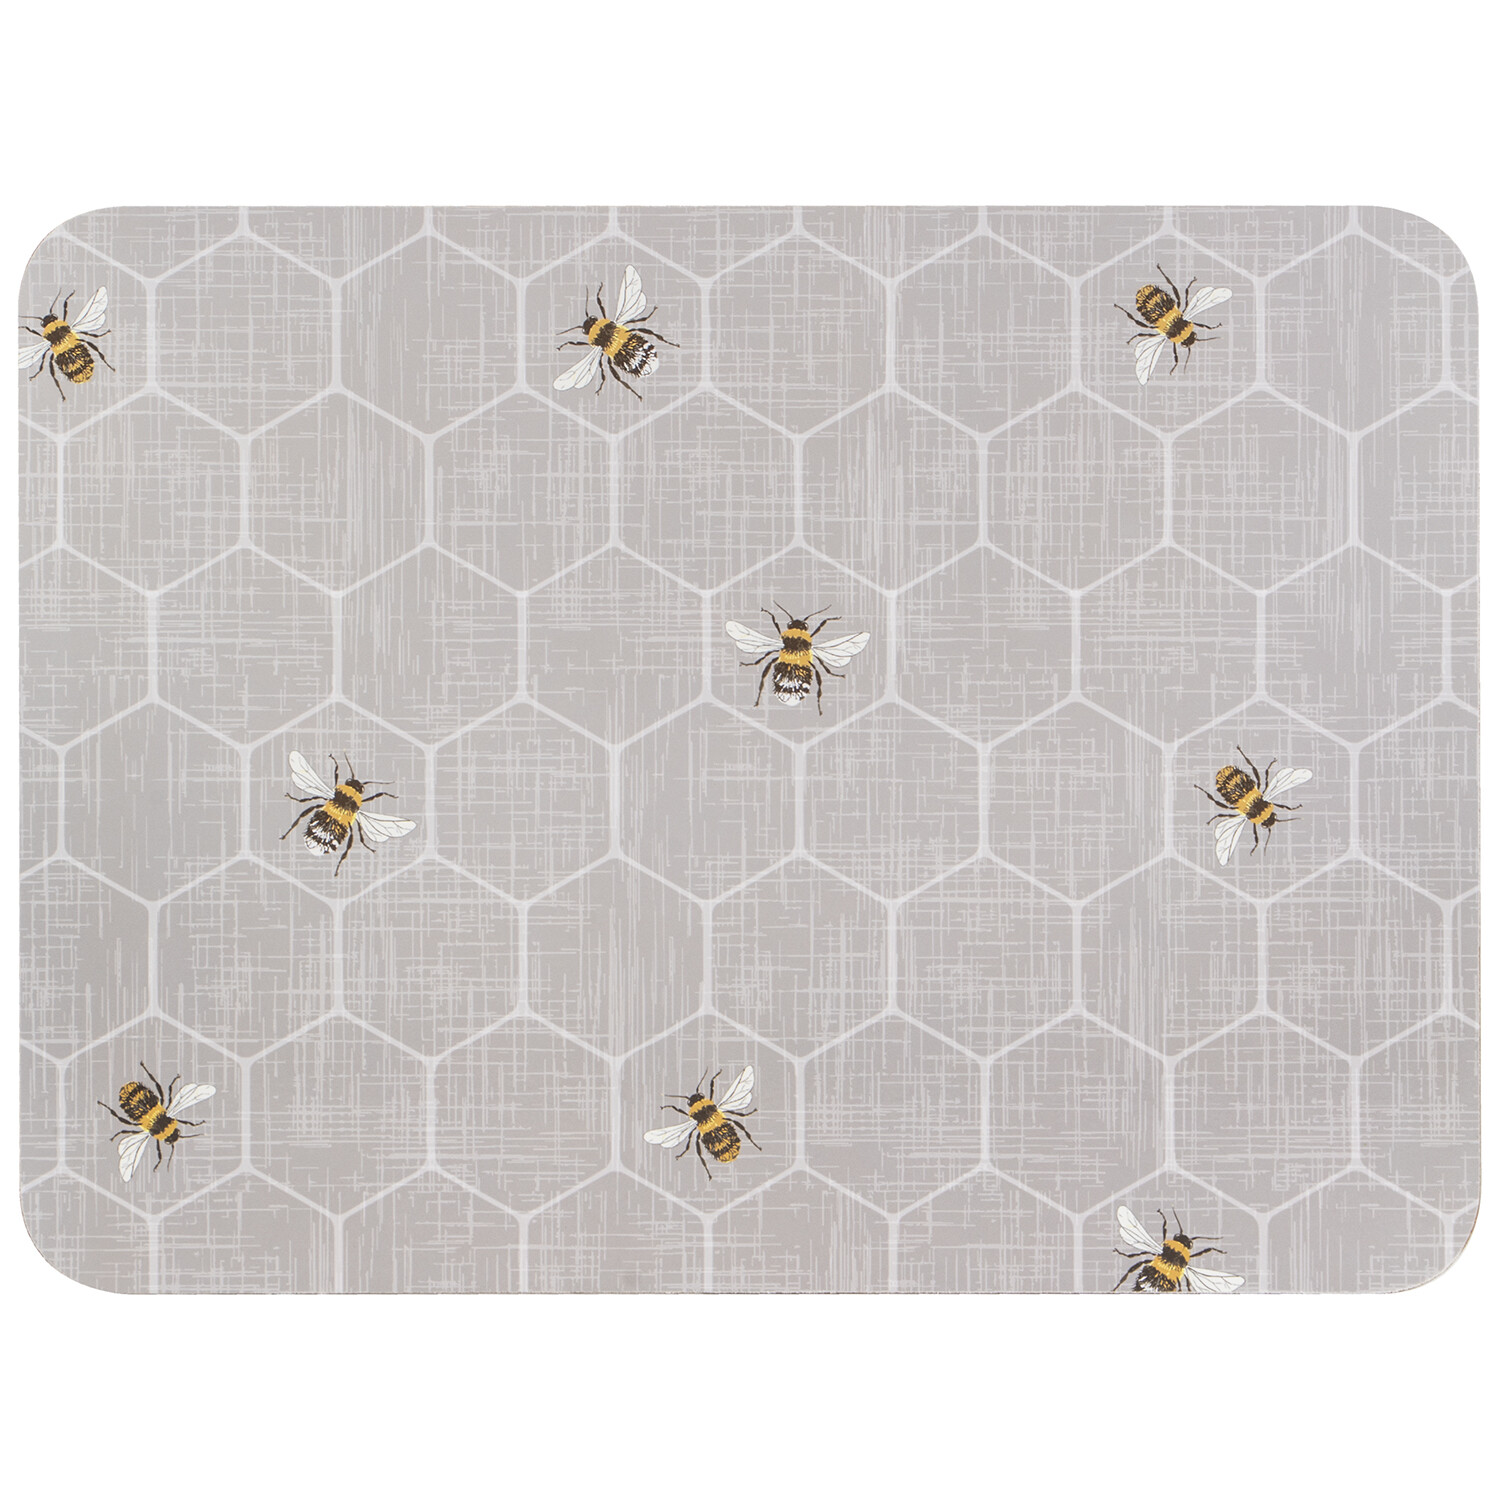 Honey Bee Placemats 6 Pack Image 1